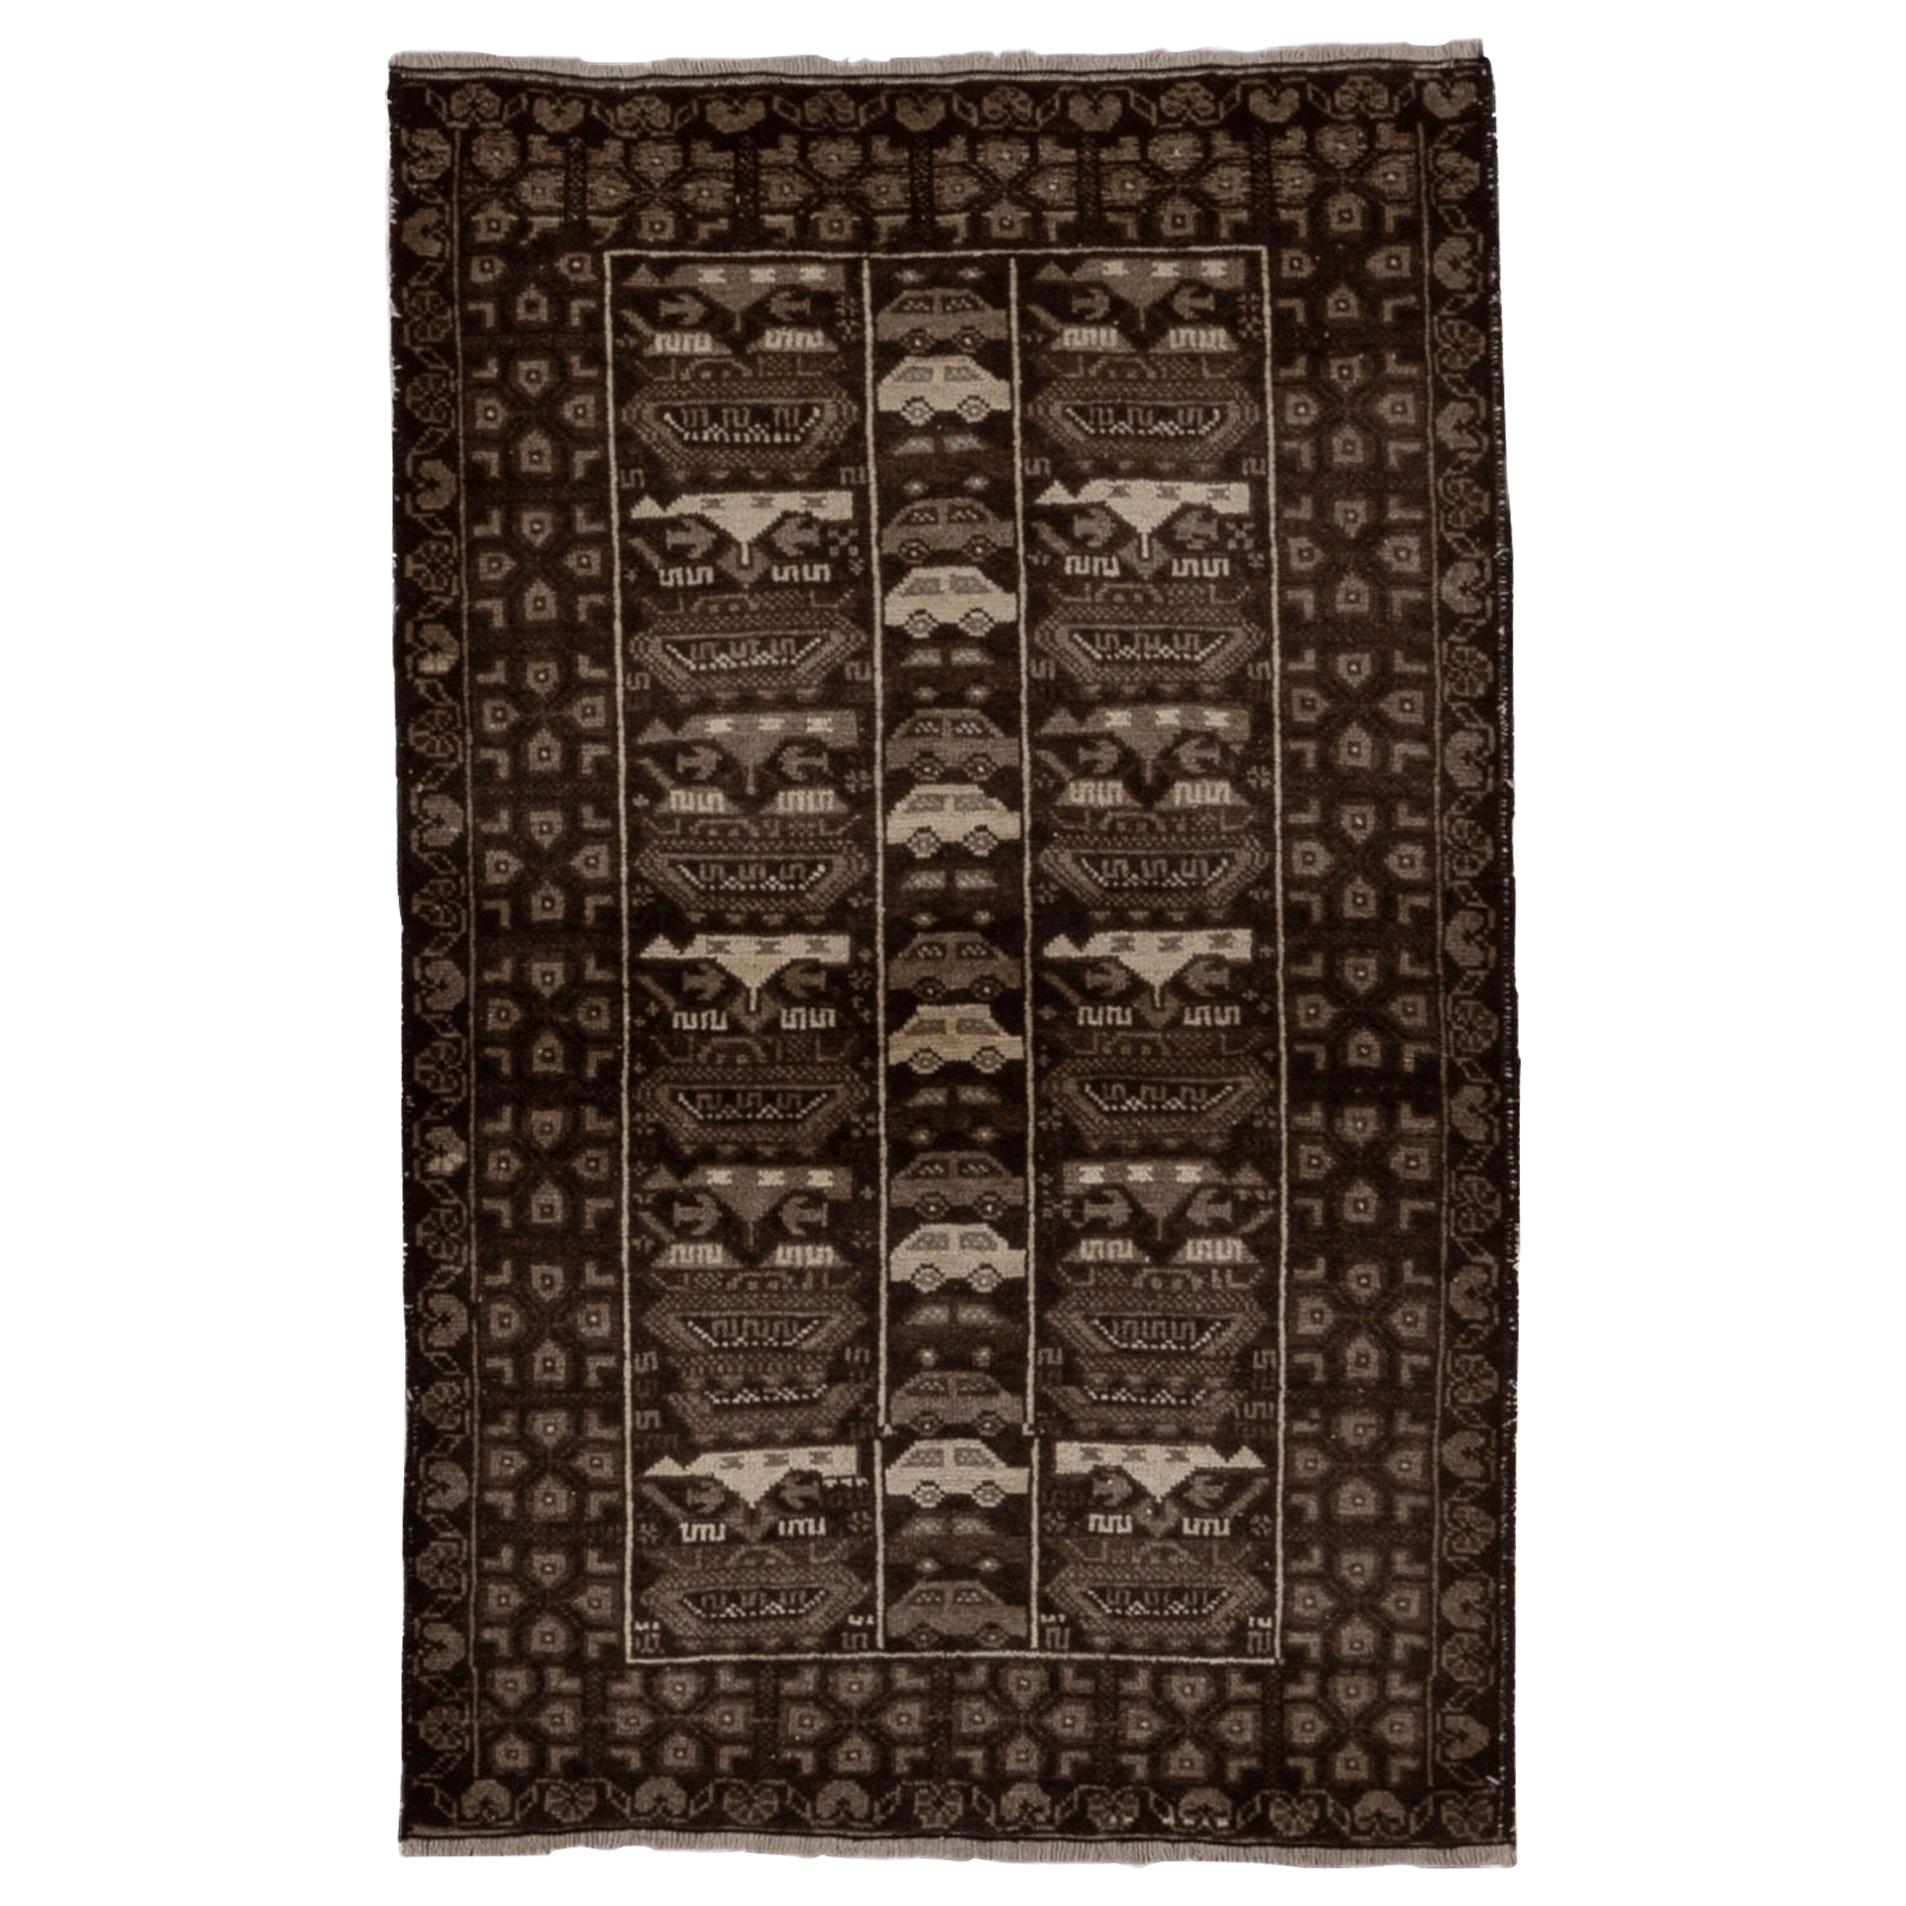 Tribal Belouch Scatter Rug, Dark Espresso Brown Field, Gray and White Accents